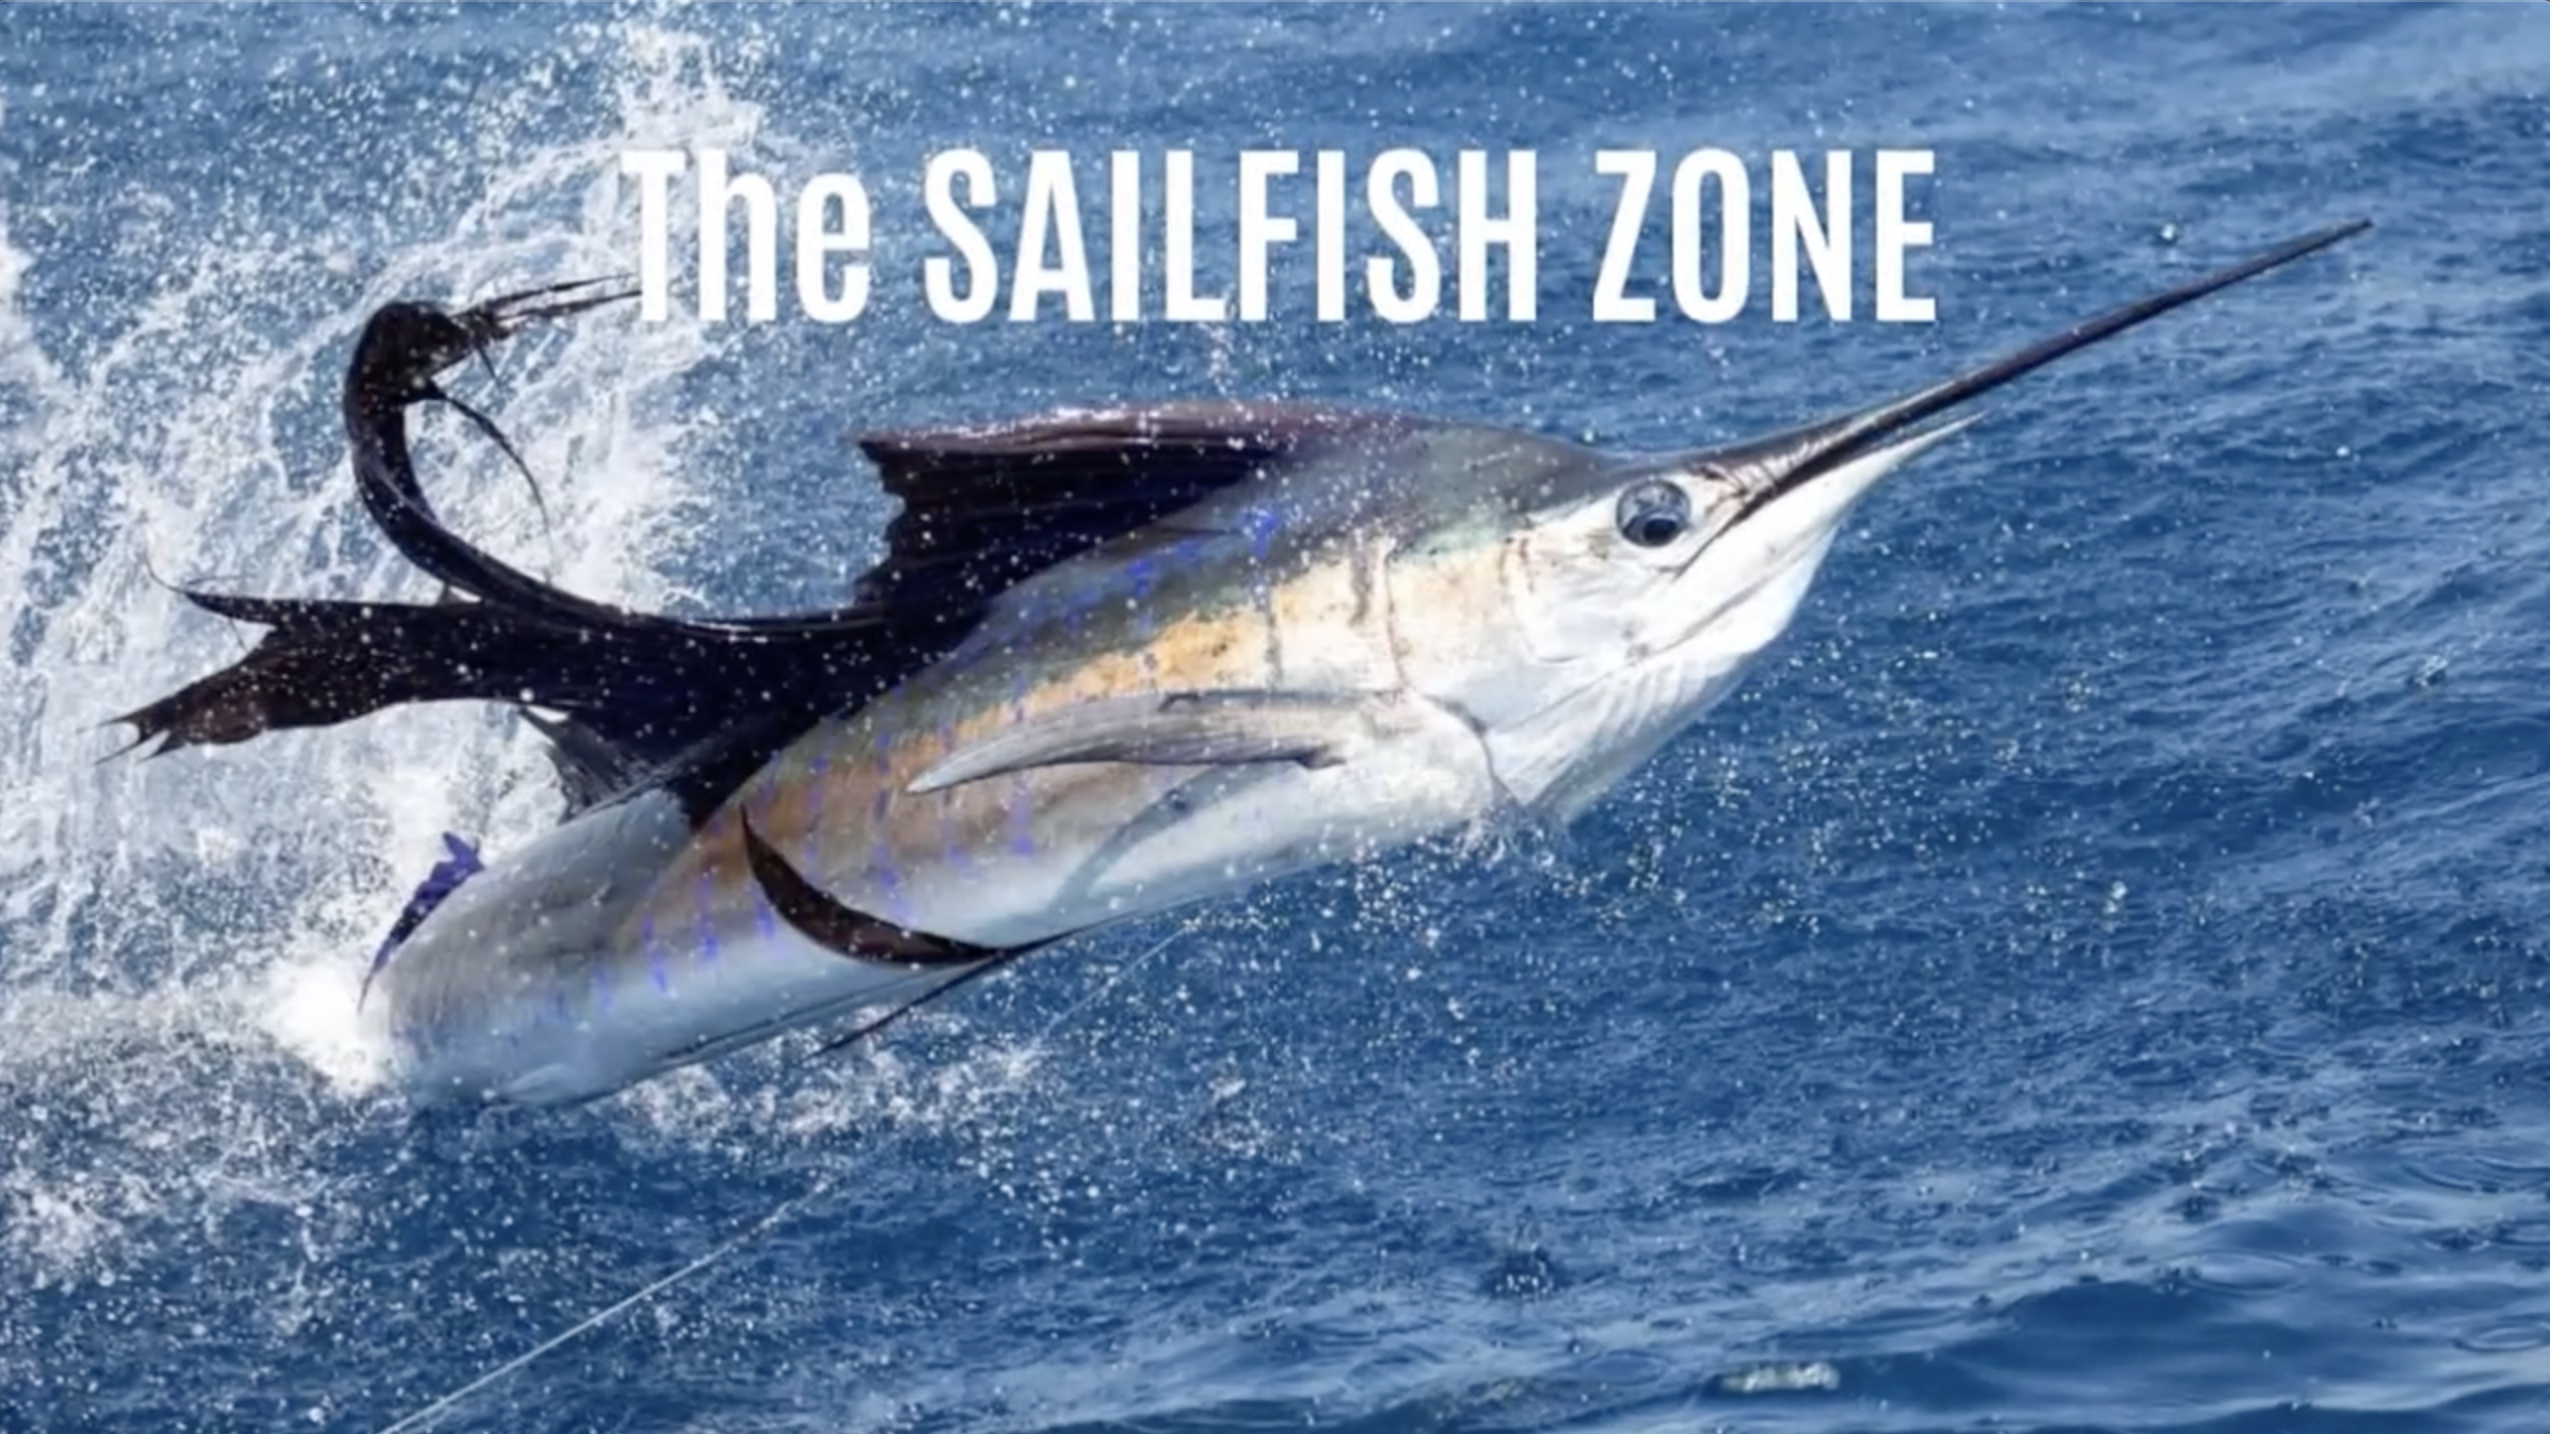 Click to play a 48 sec video introducing The Sailfish Zone